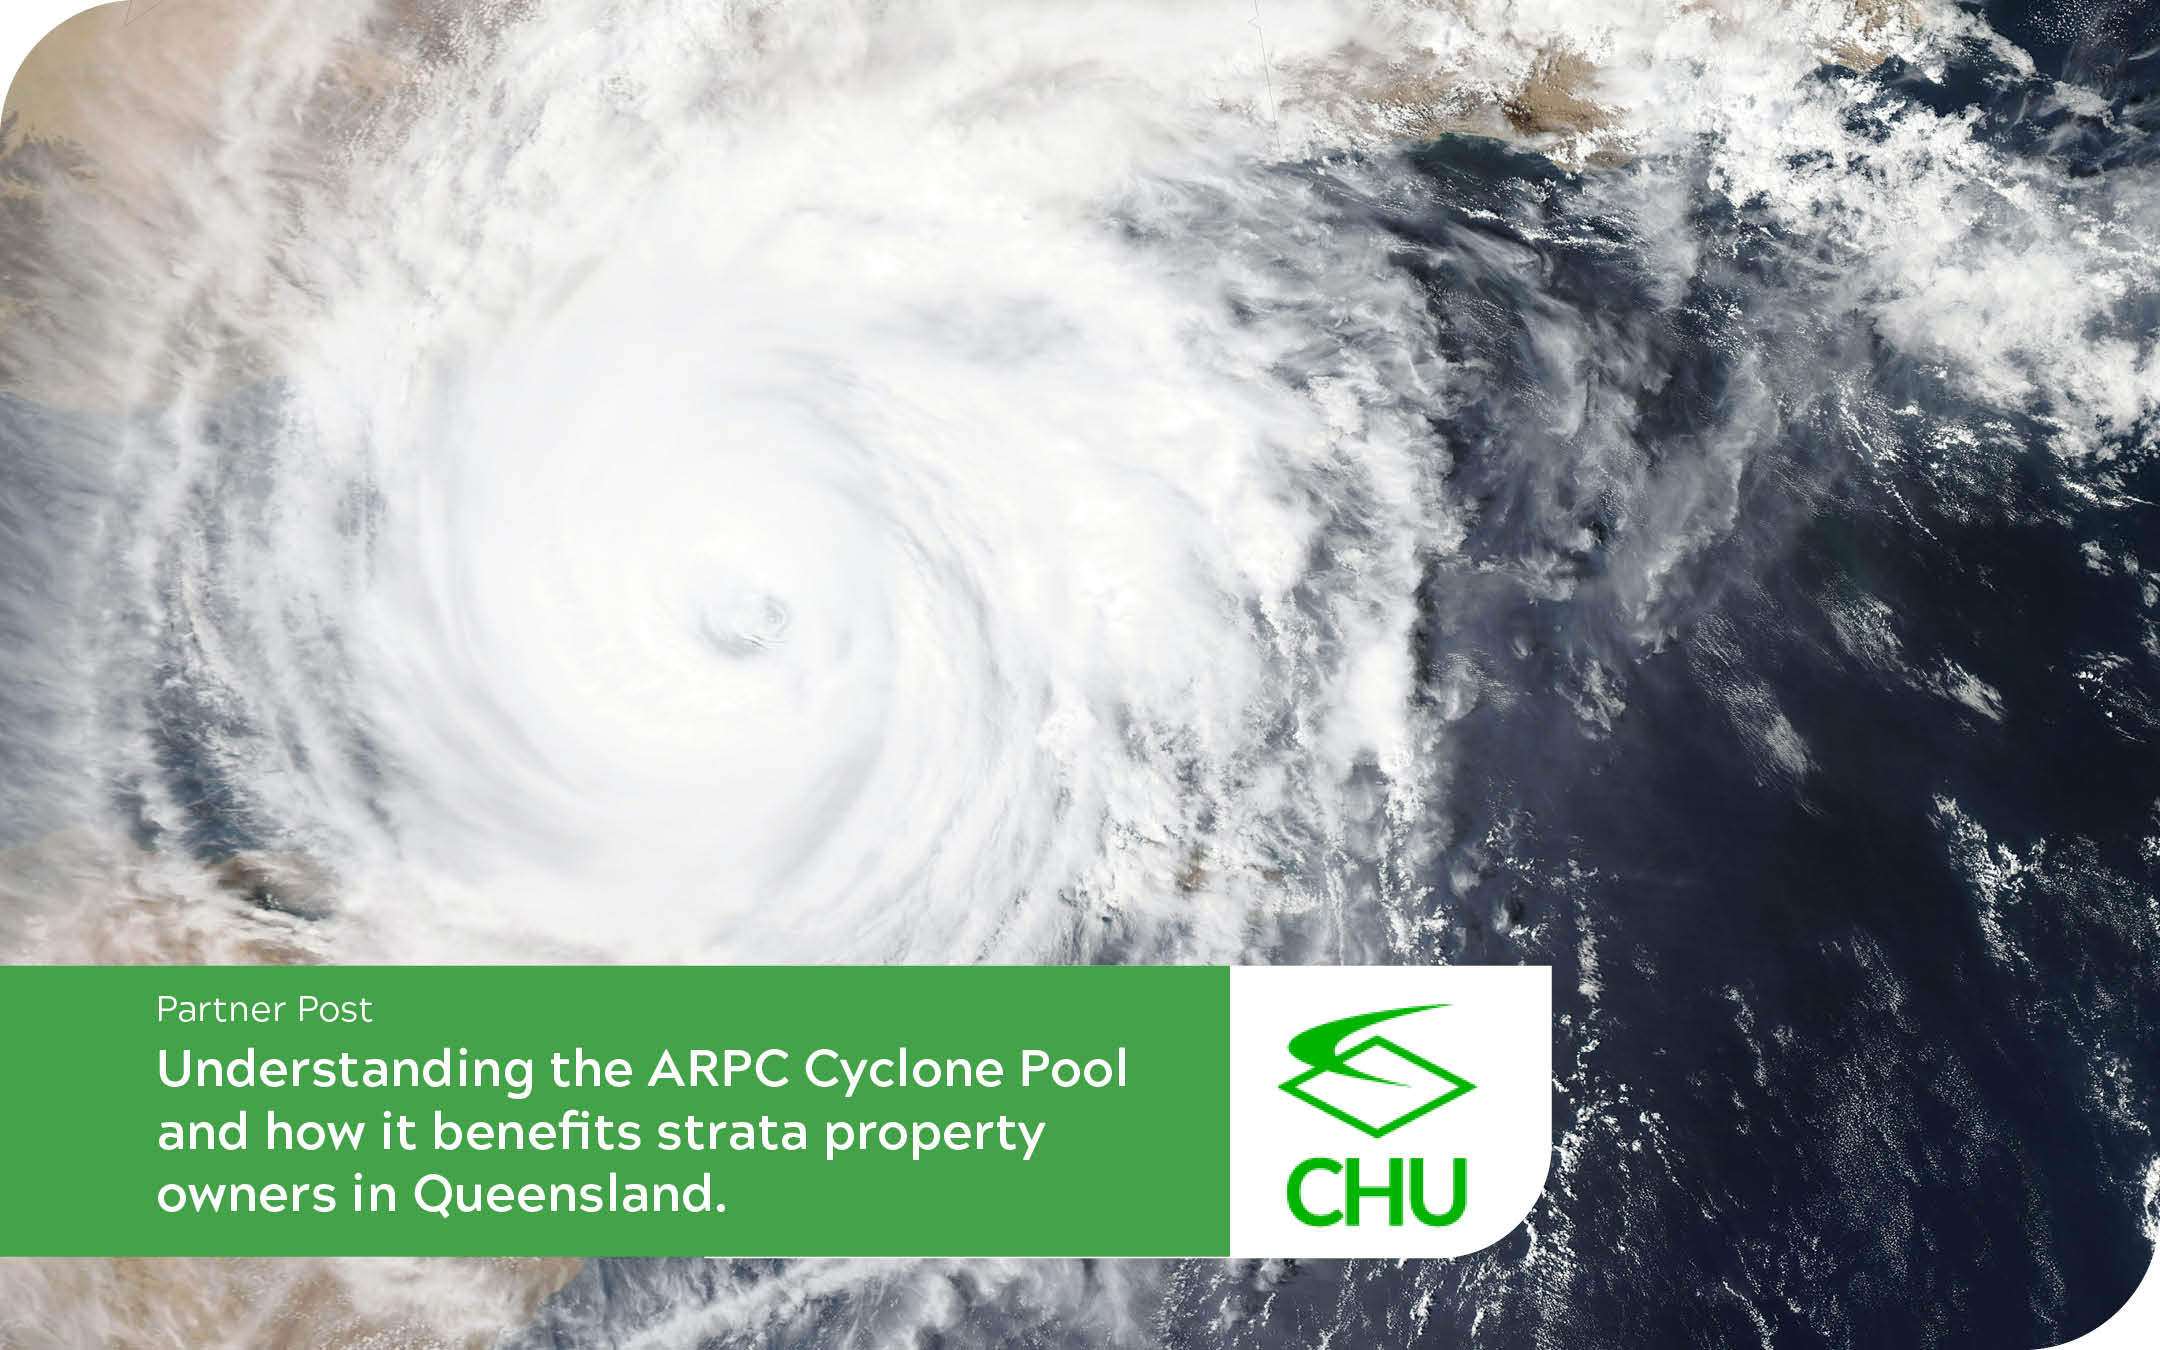 Understanding the ARPC Cyclone Pool and how it benefits strata property owners in Queensland